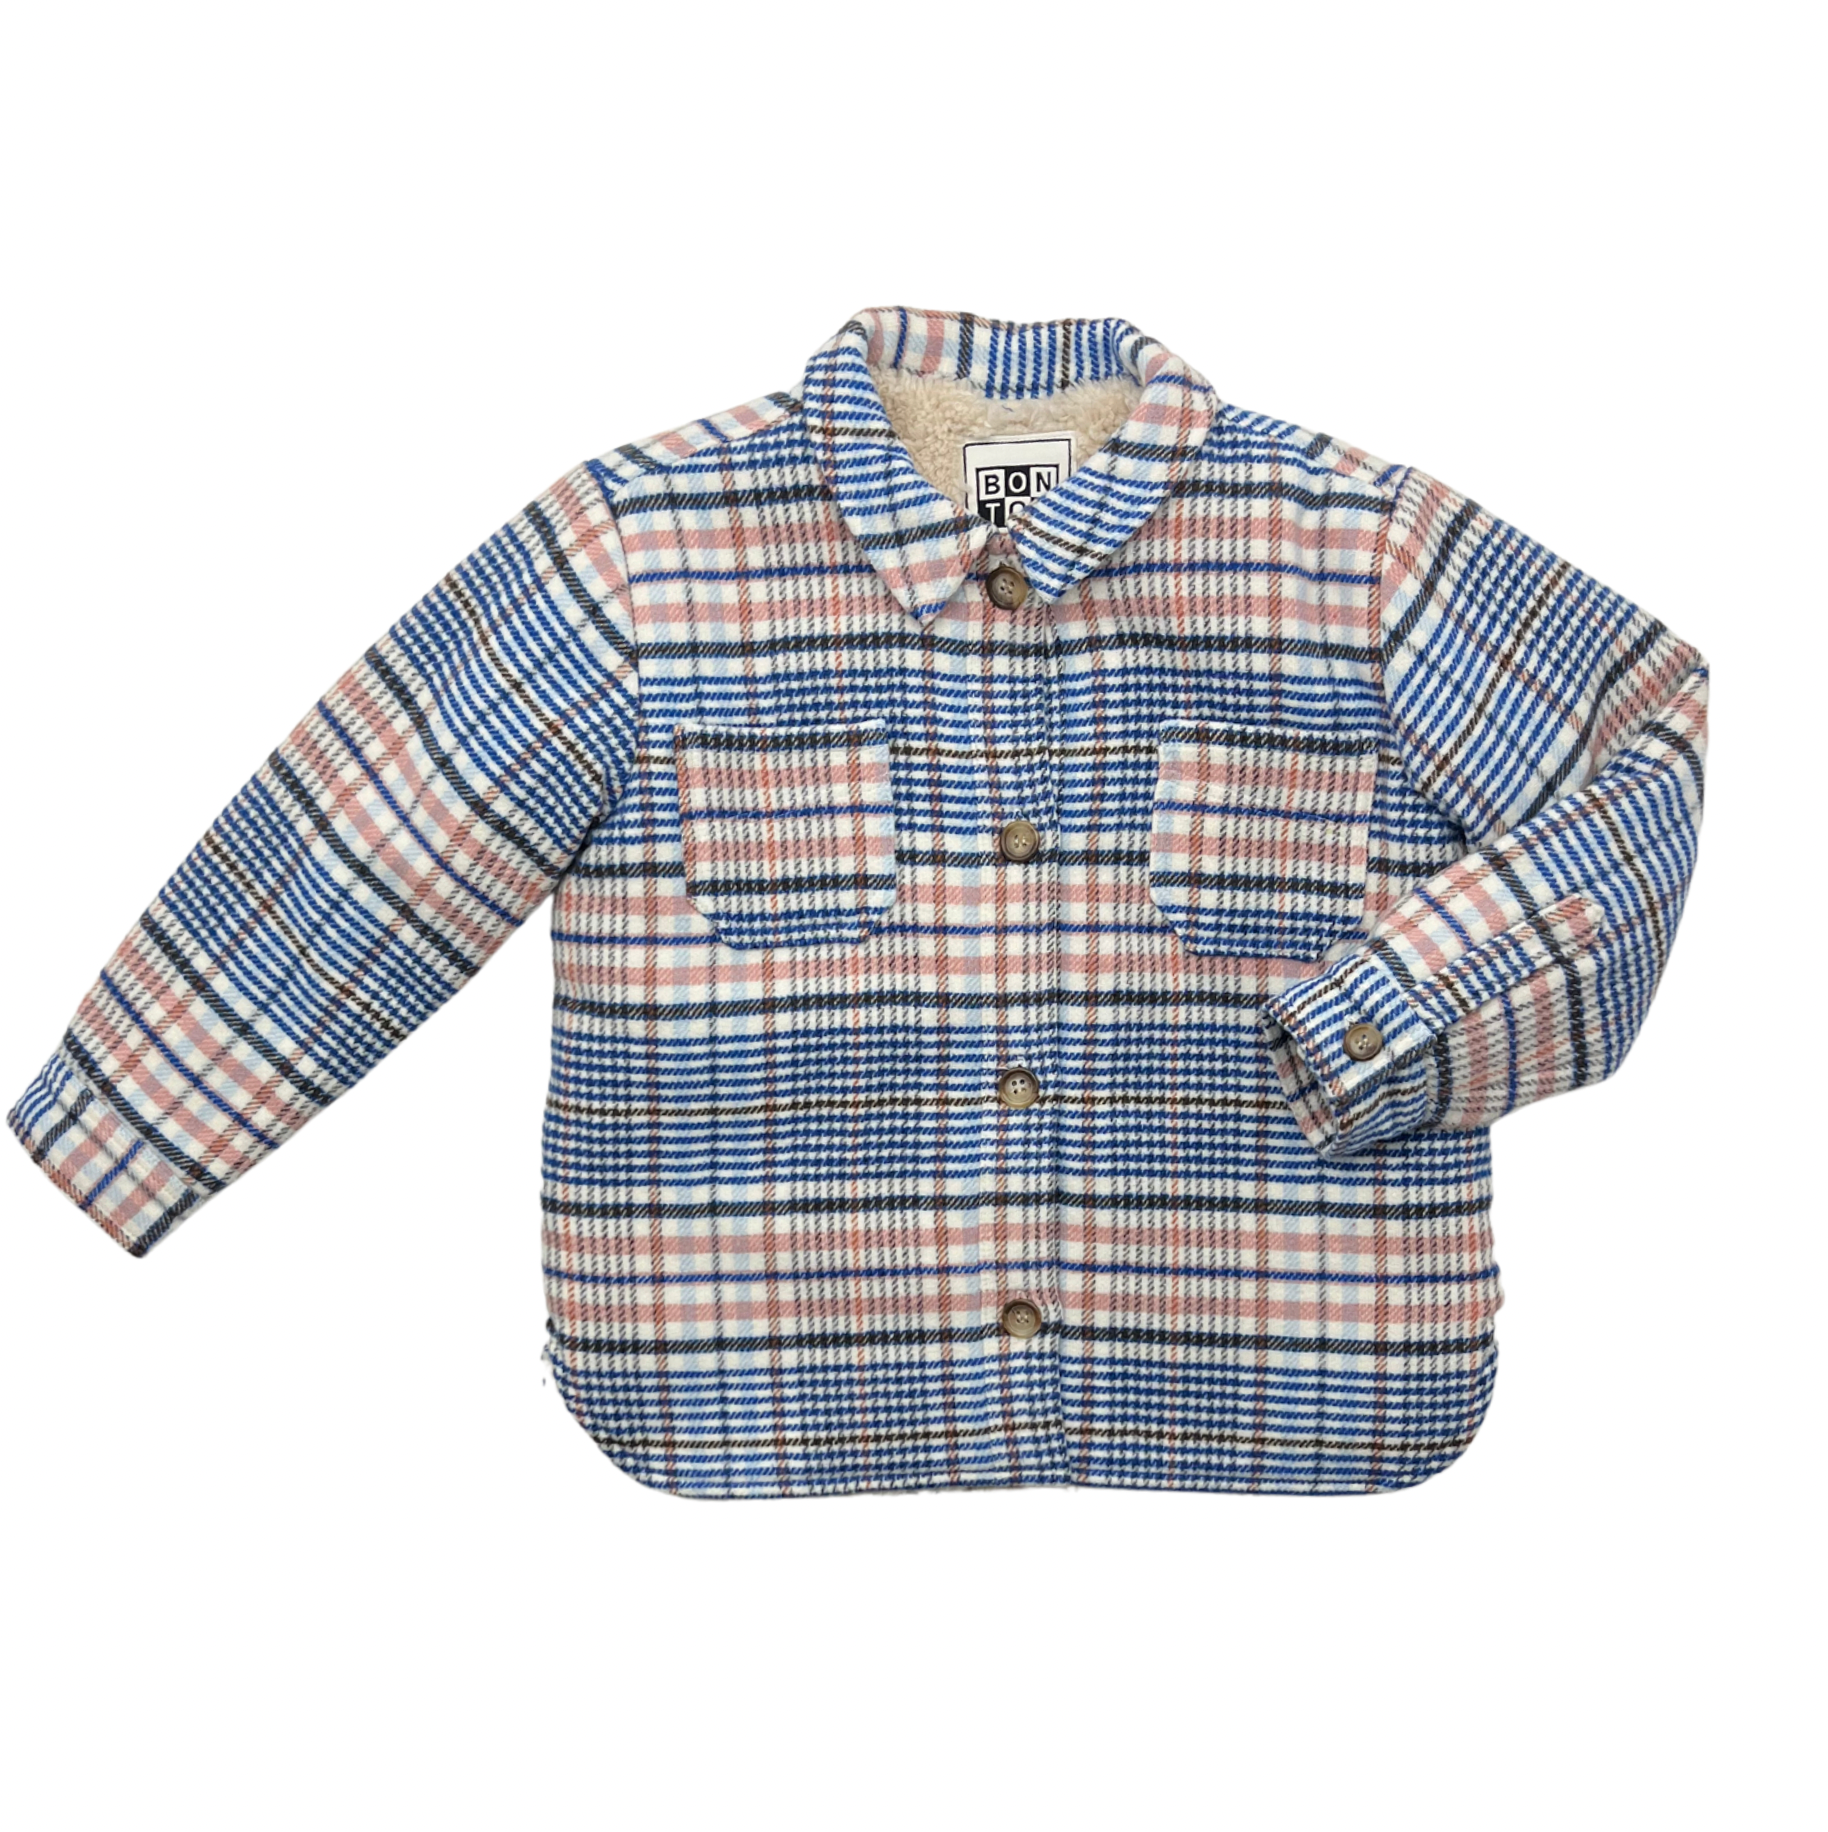 BONTON - Pink checked lined overshirt jacket - 6 years old